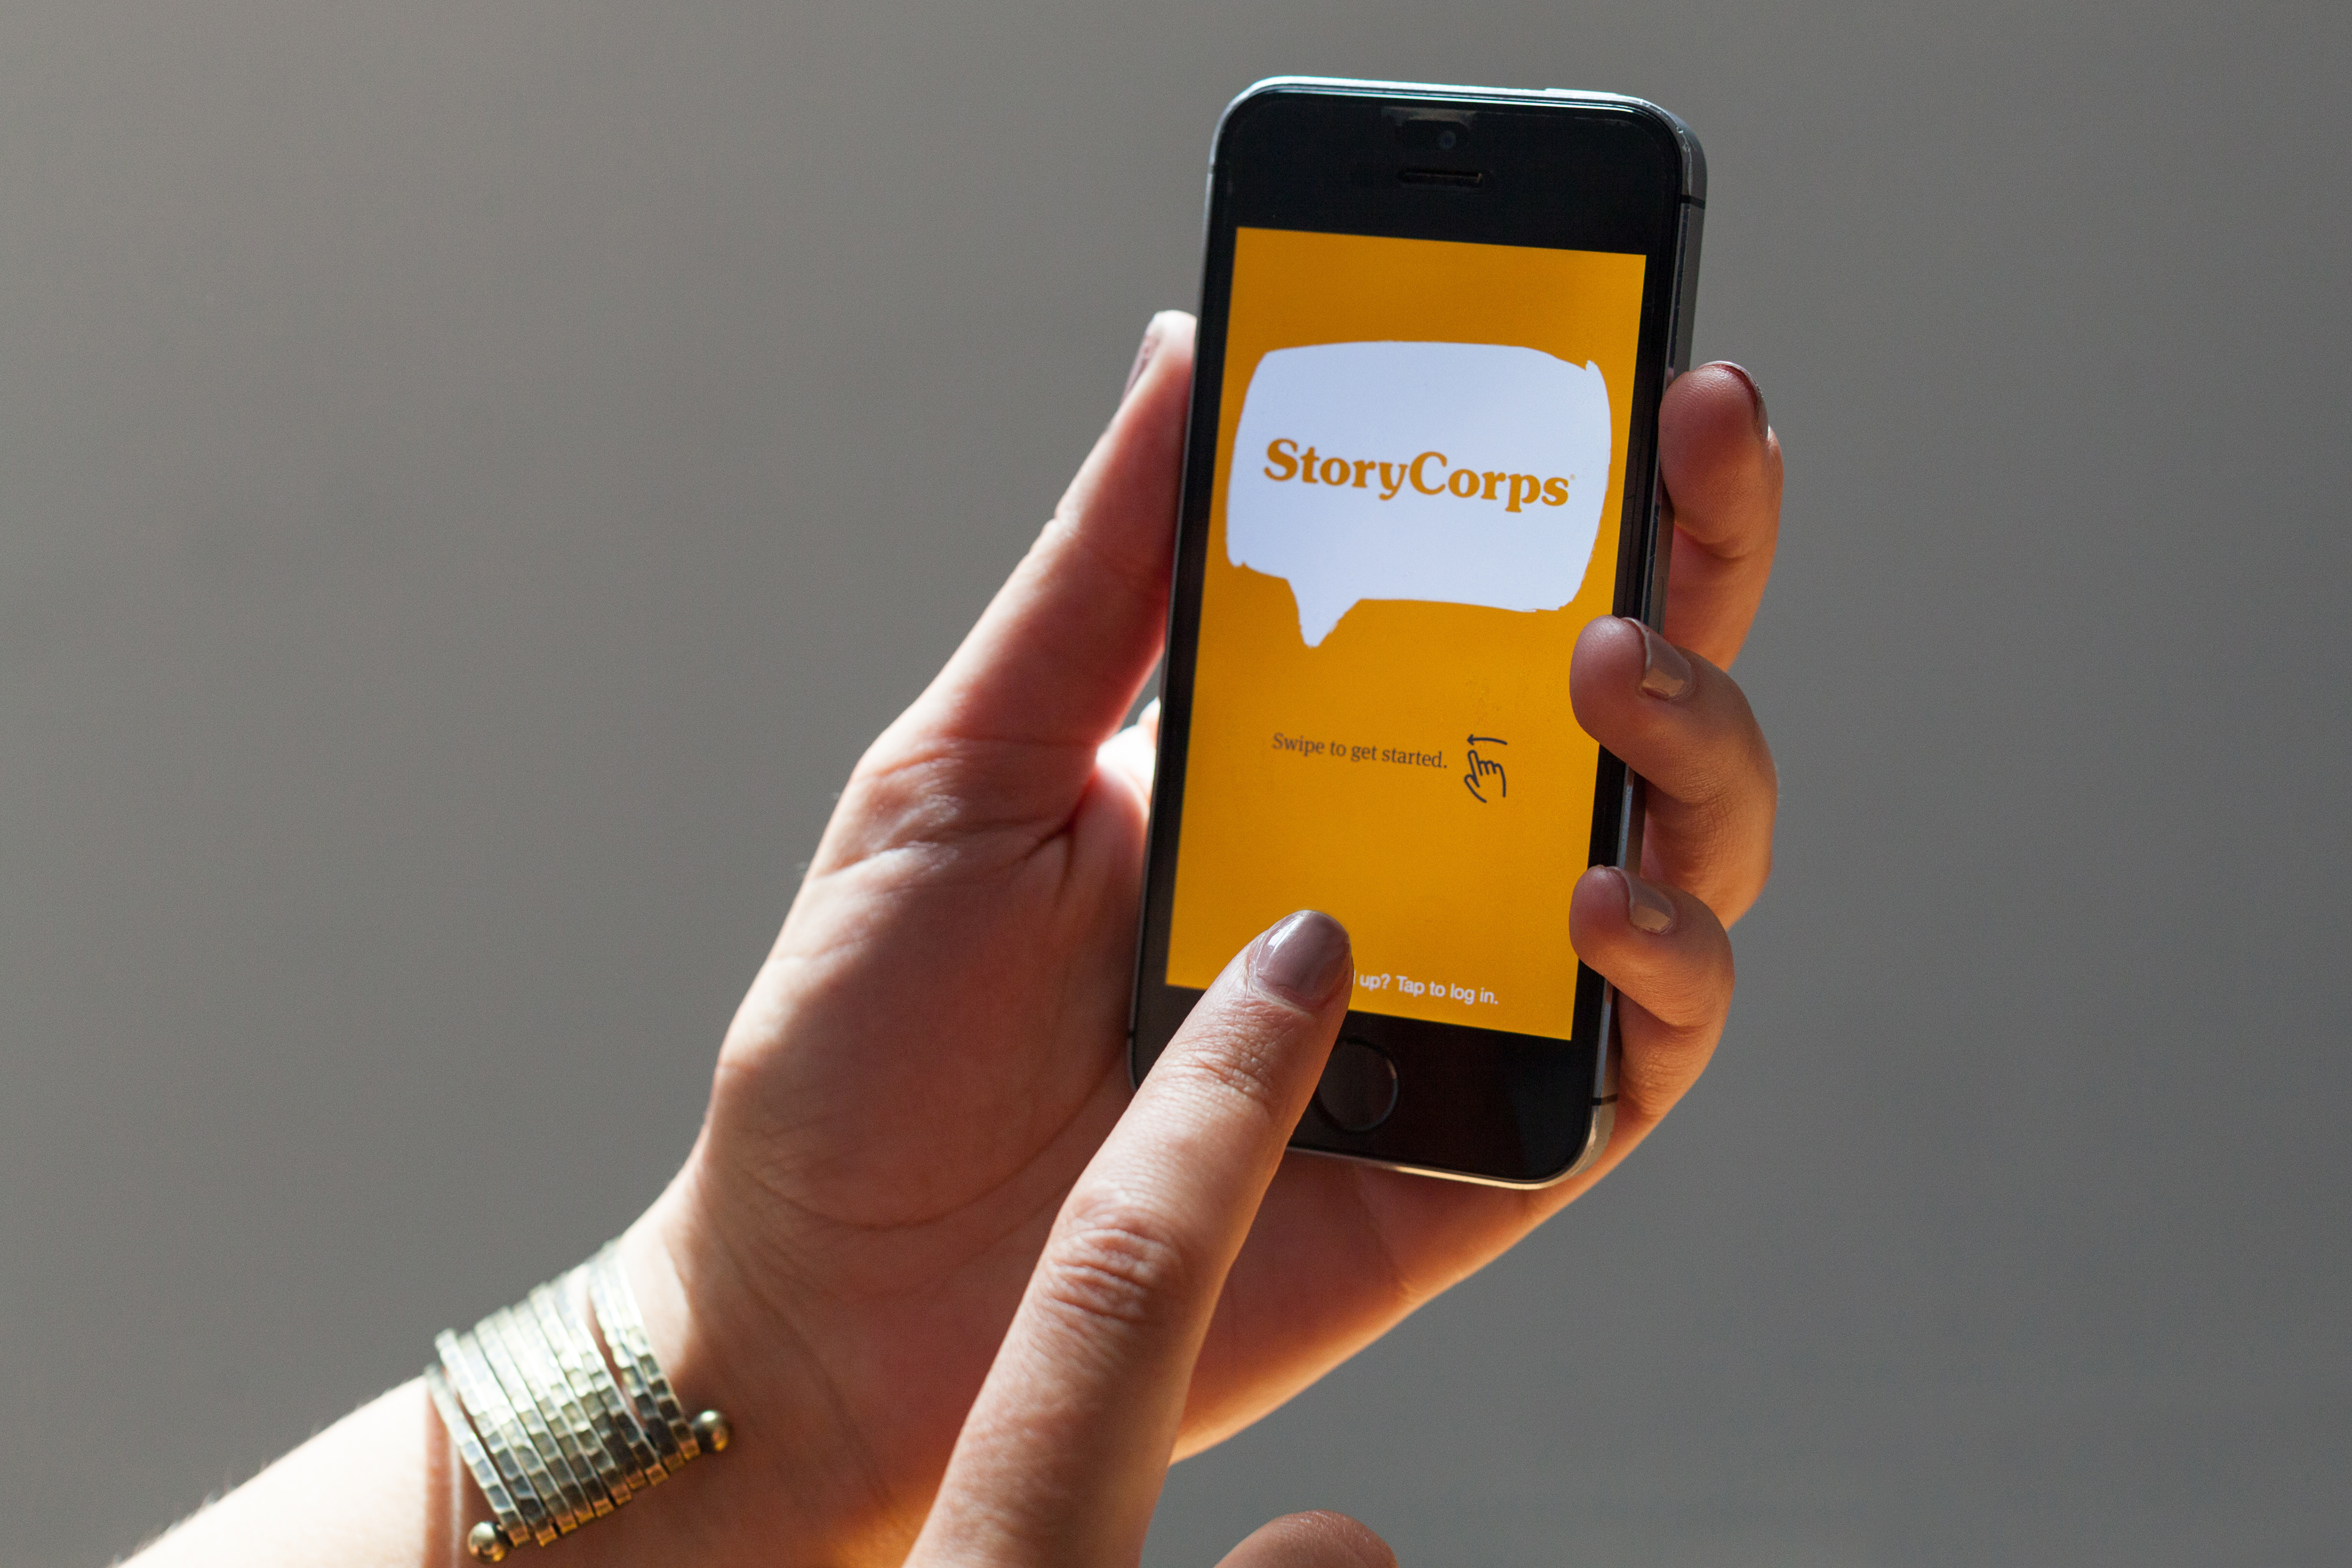 The StoryCorps app was launched with the 2015 TED Prize. In its first year, more than 82,000 interviews have been recorded using it. It has more than doubled StoryCorps' archive of voices. Photo: Courtesy of StoryCorps